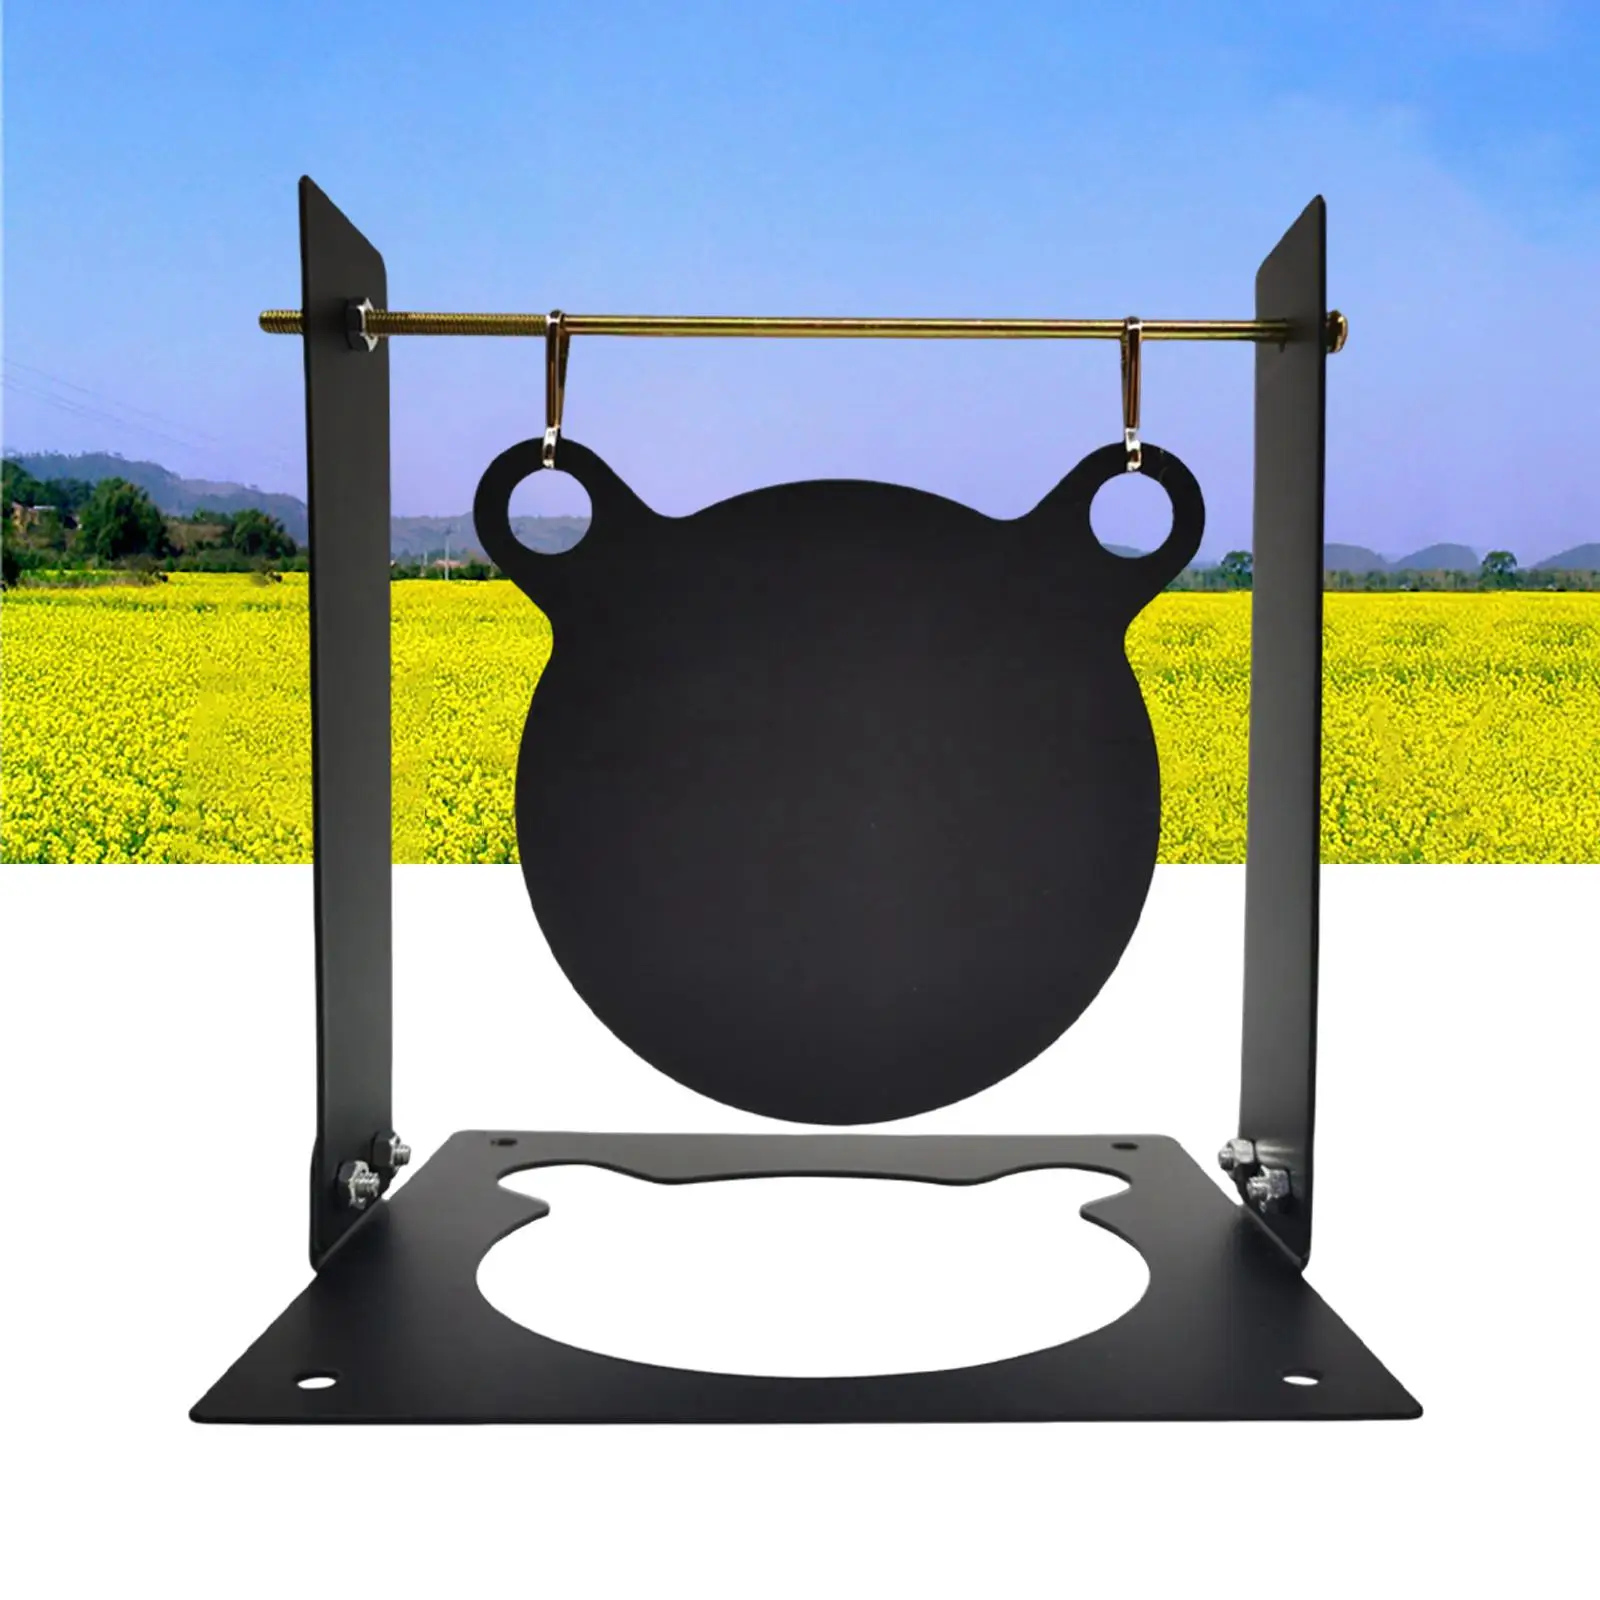 Trainer Target Bear Shaped Hanging Target Outdoor Sports Toy Target for Kids